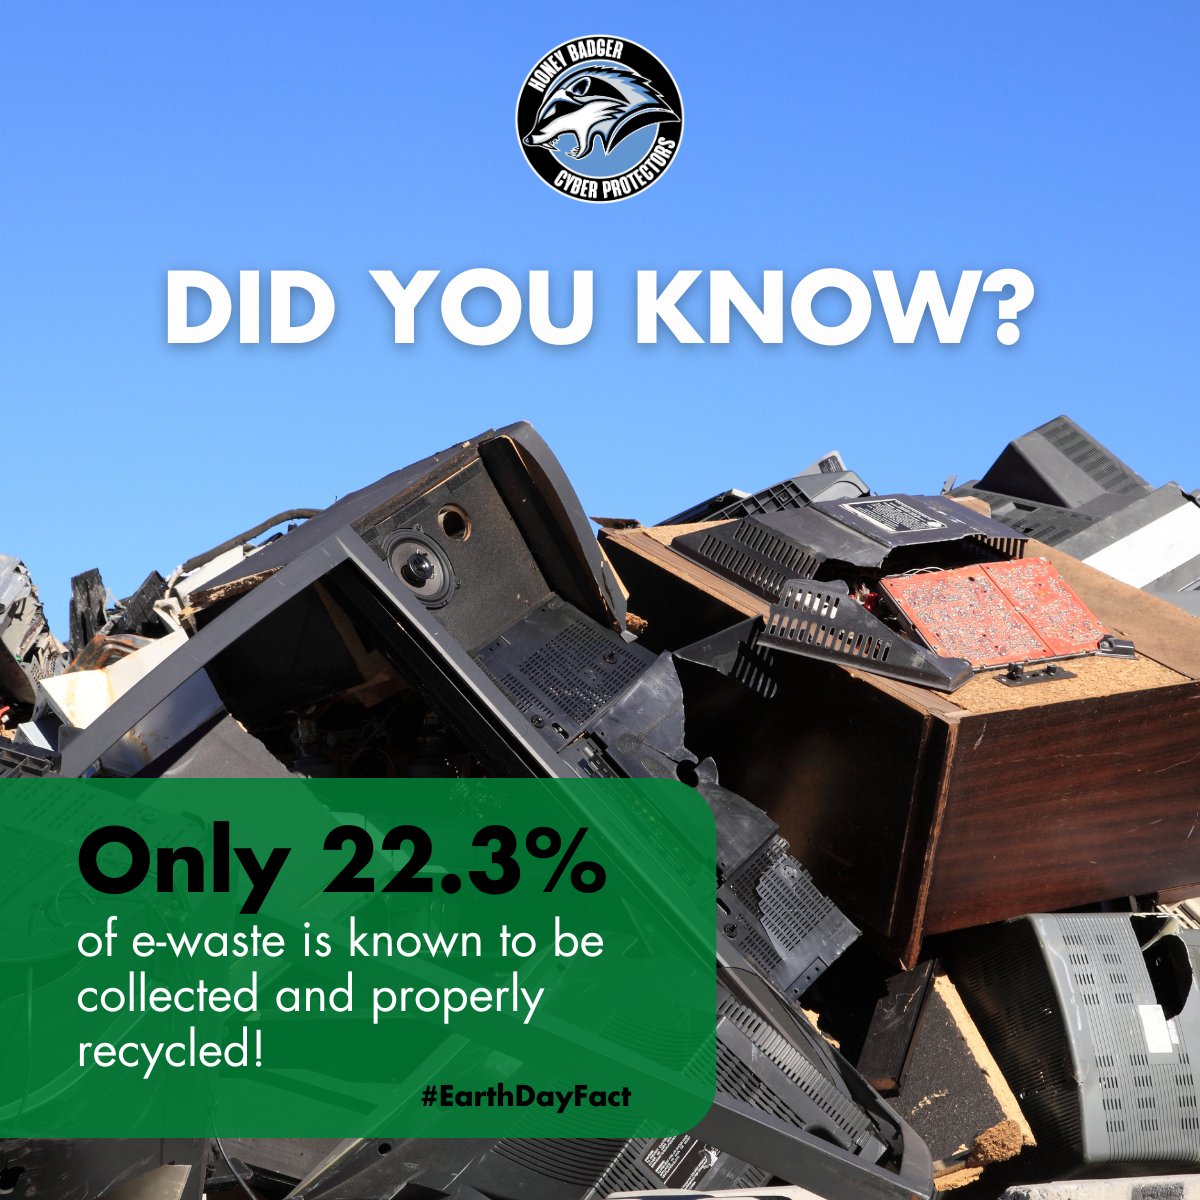 As we look ahead to #EarthDay, remember that sustainability extends to how we manage our IT assets. In 2022, only 22.3% of e-waste was collected and properly recycled!

#GreenIT #SustainableSolutions #ITAD #ITAM #Reclamere